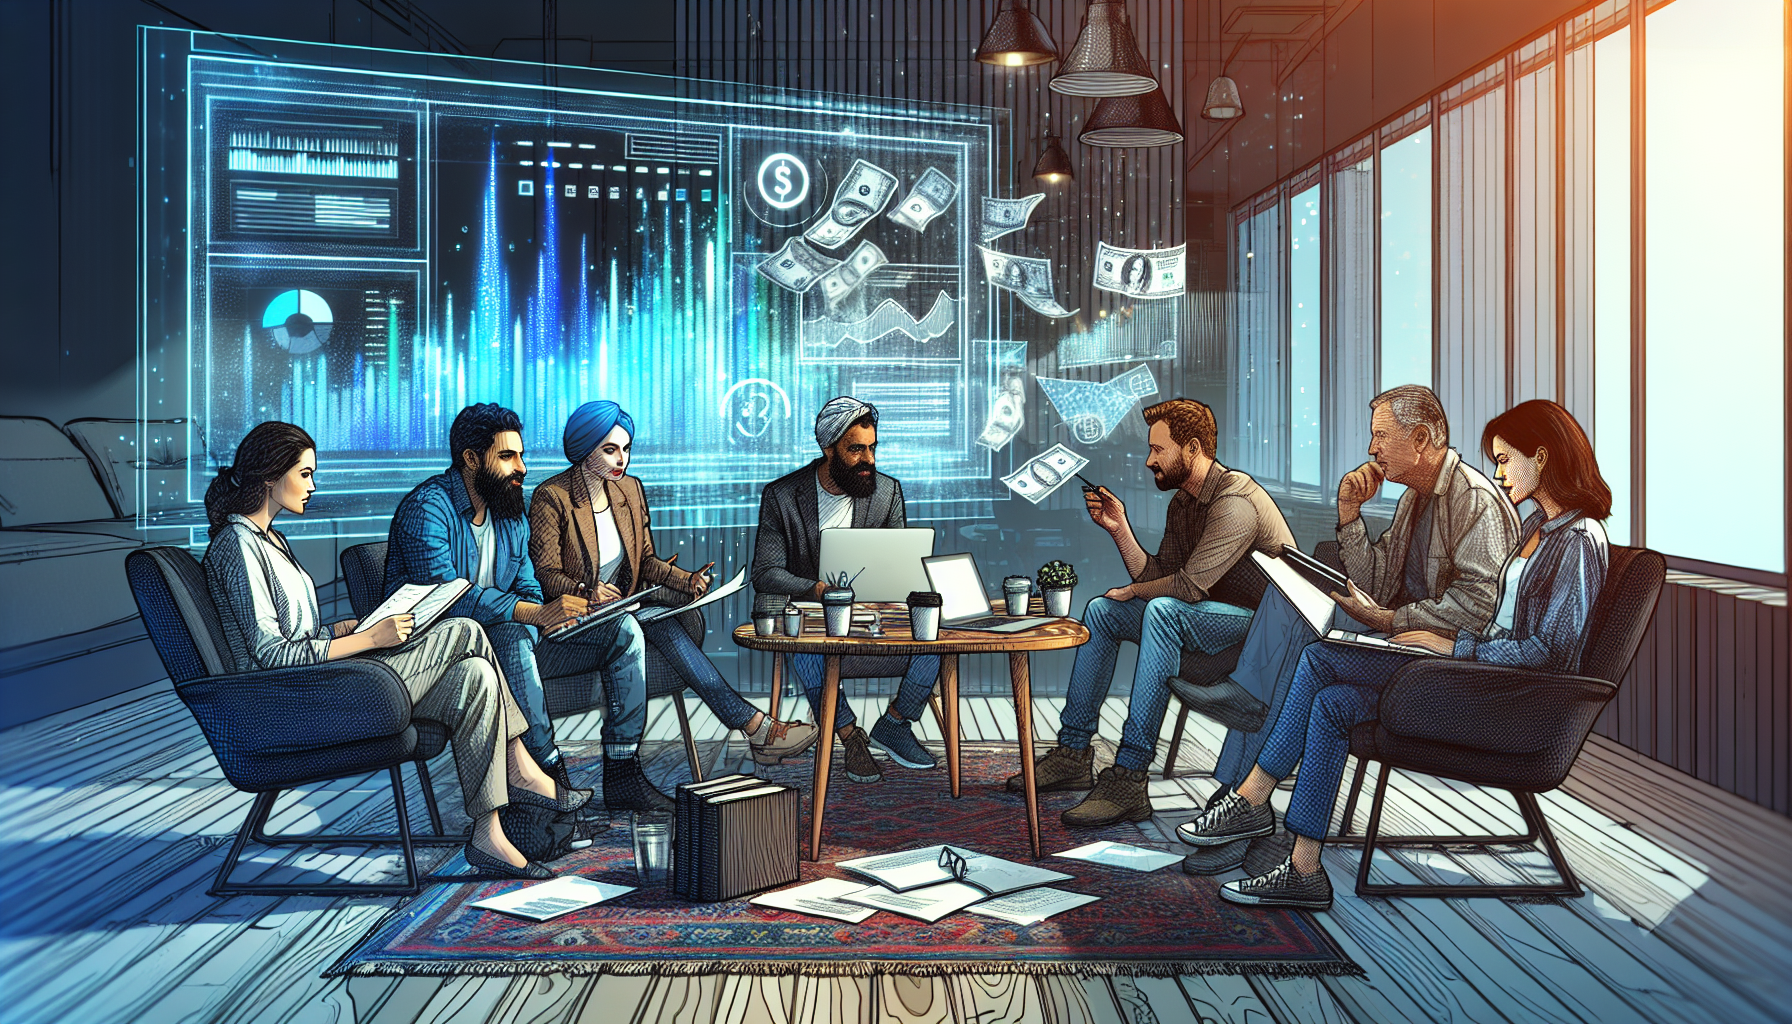 A diverse group of screenwriters brainstorming in a modern, cozy writing room filled with laptops, coffee cups, and scripts, with a transparent digital display showing fluctuating income statistics an